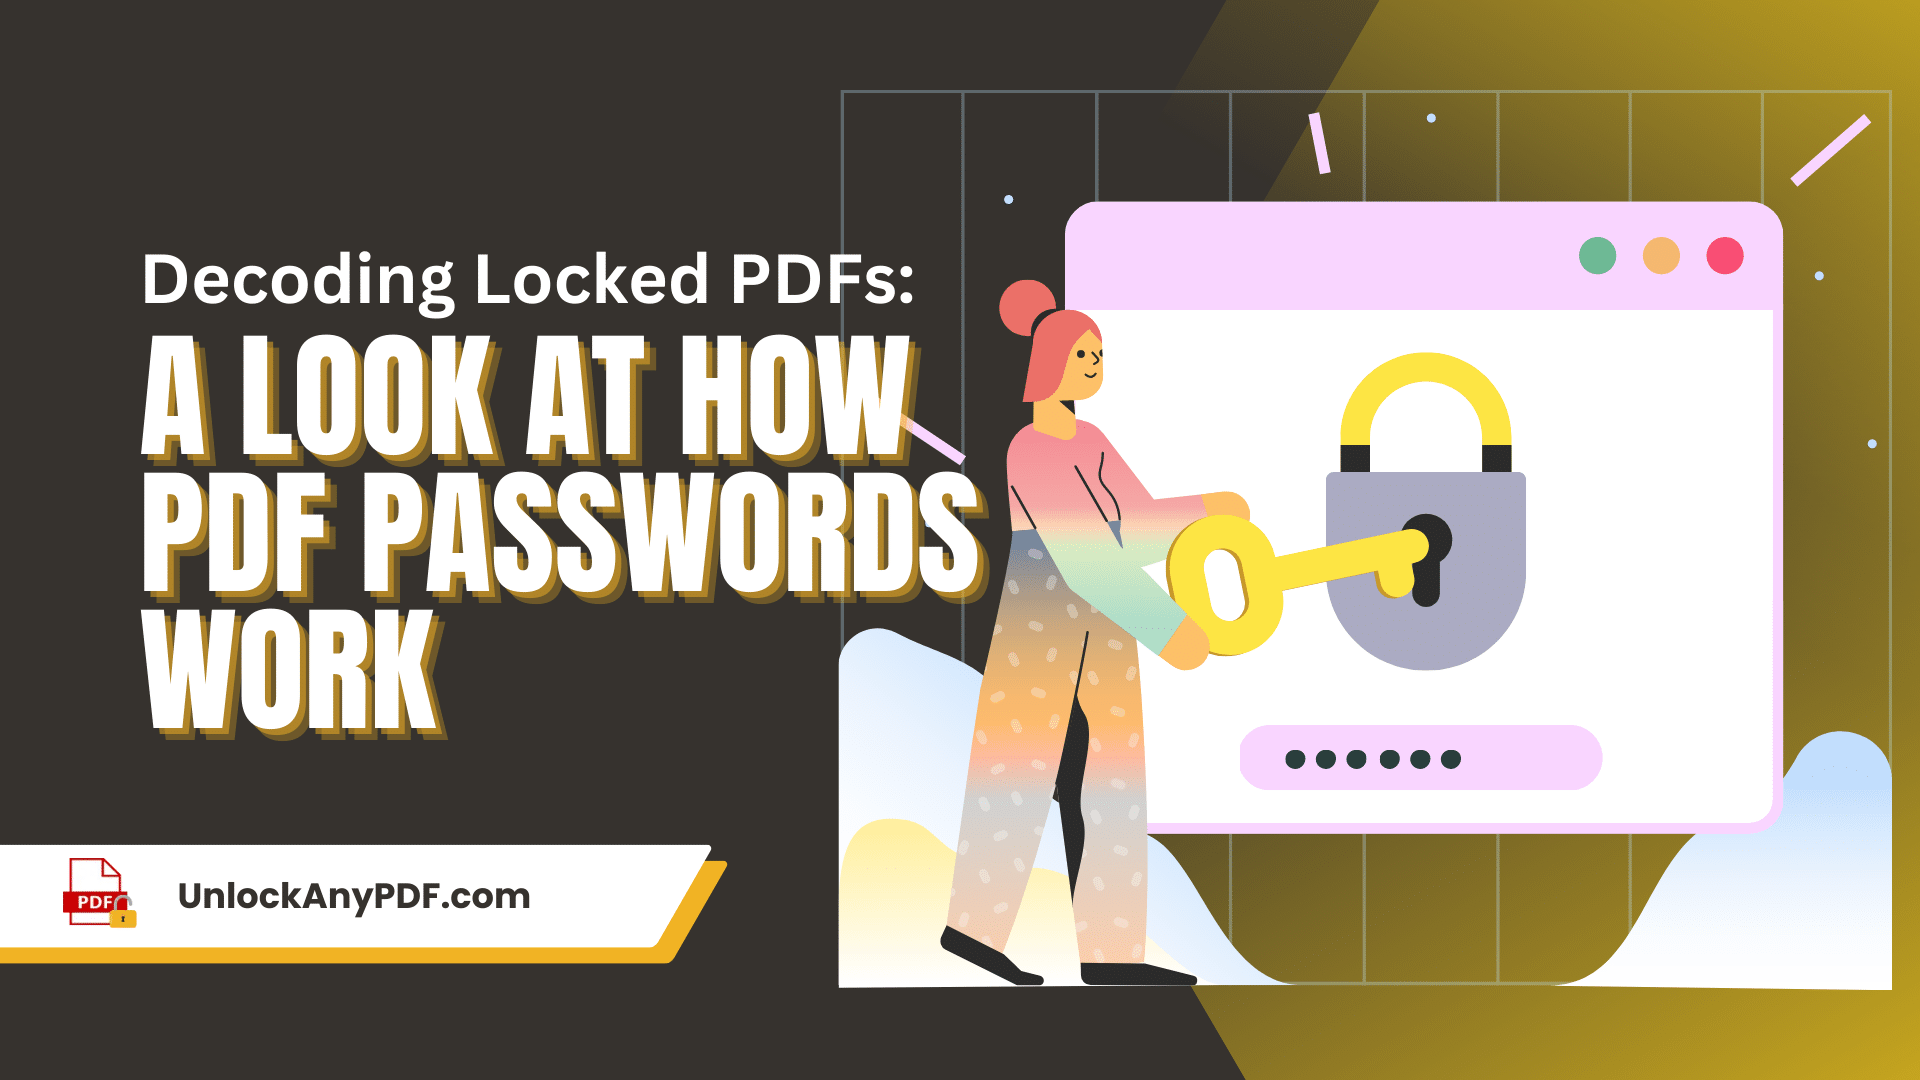 Decoding-Locked-PDFs_-A-Look-at-How-PDF-Passwords-Work